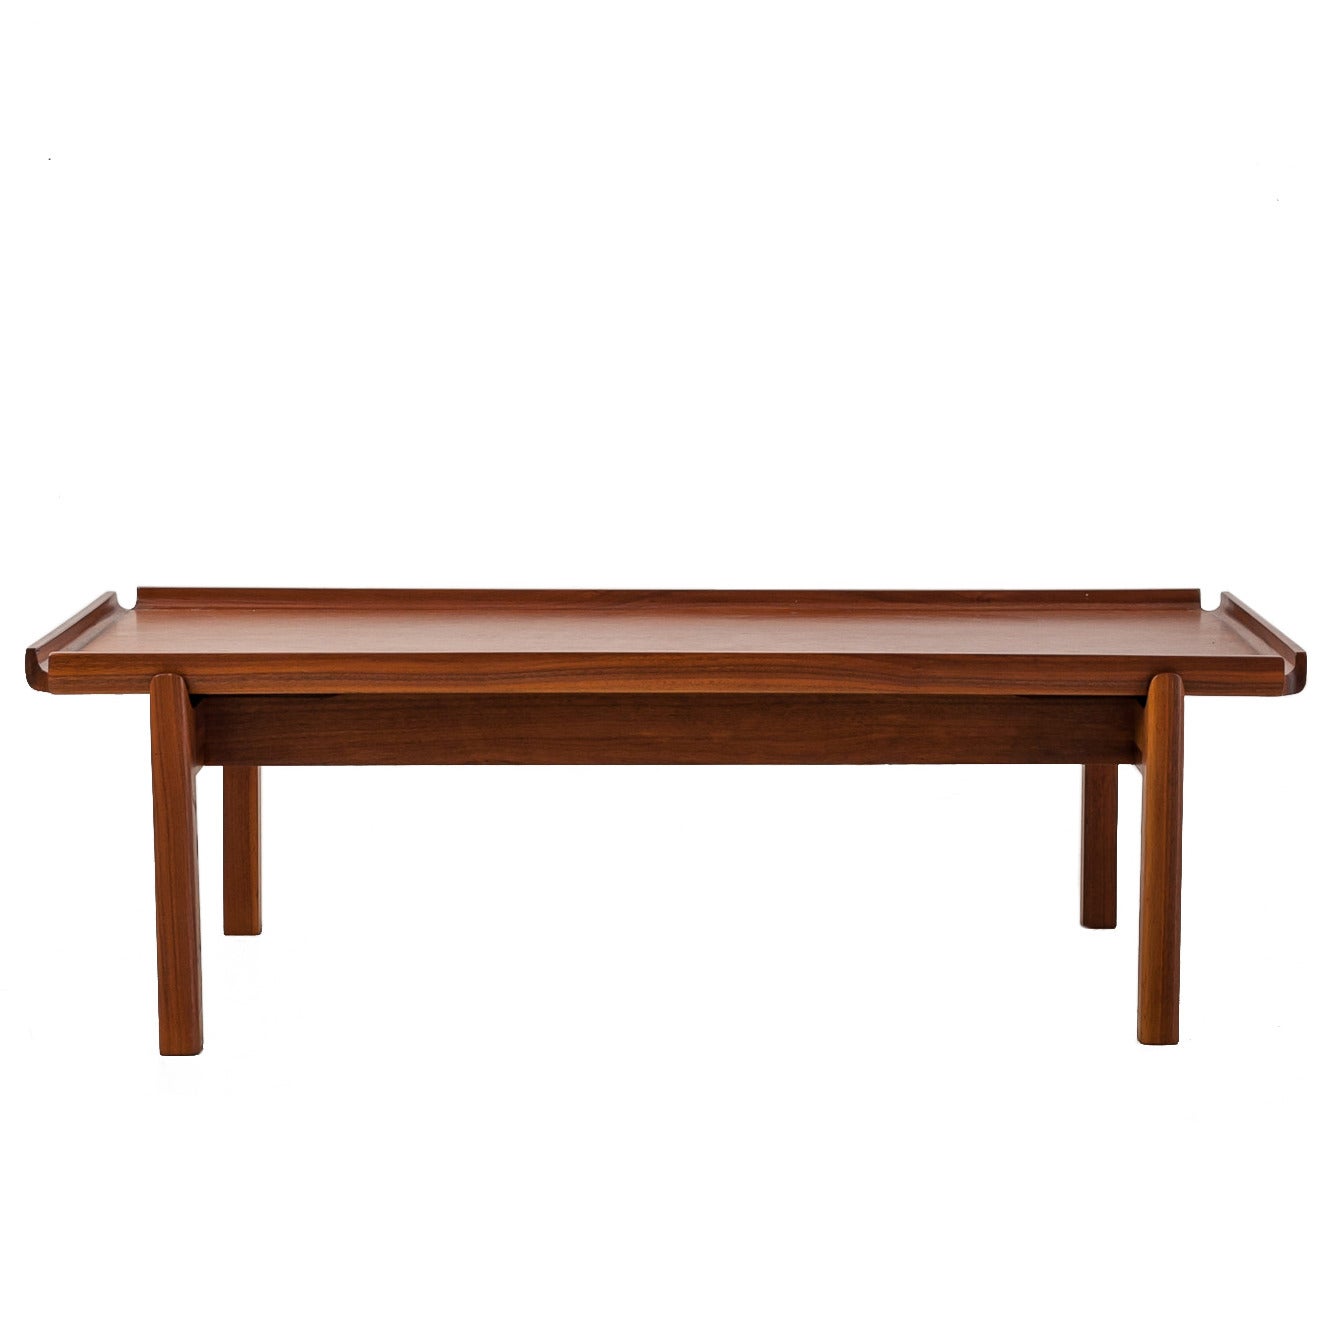 John Kapel Wooden Coffee Table with Curved Edges For Sale